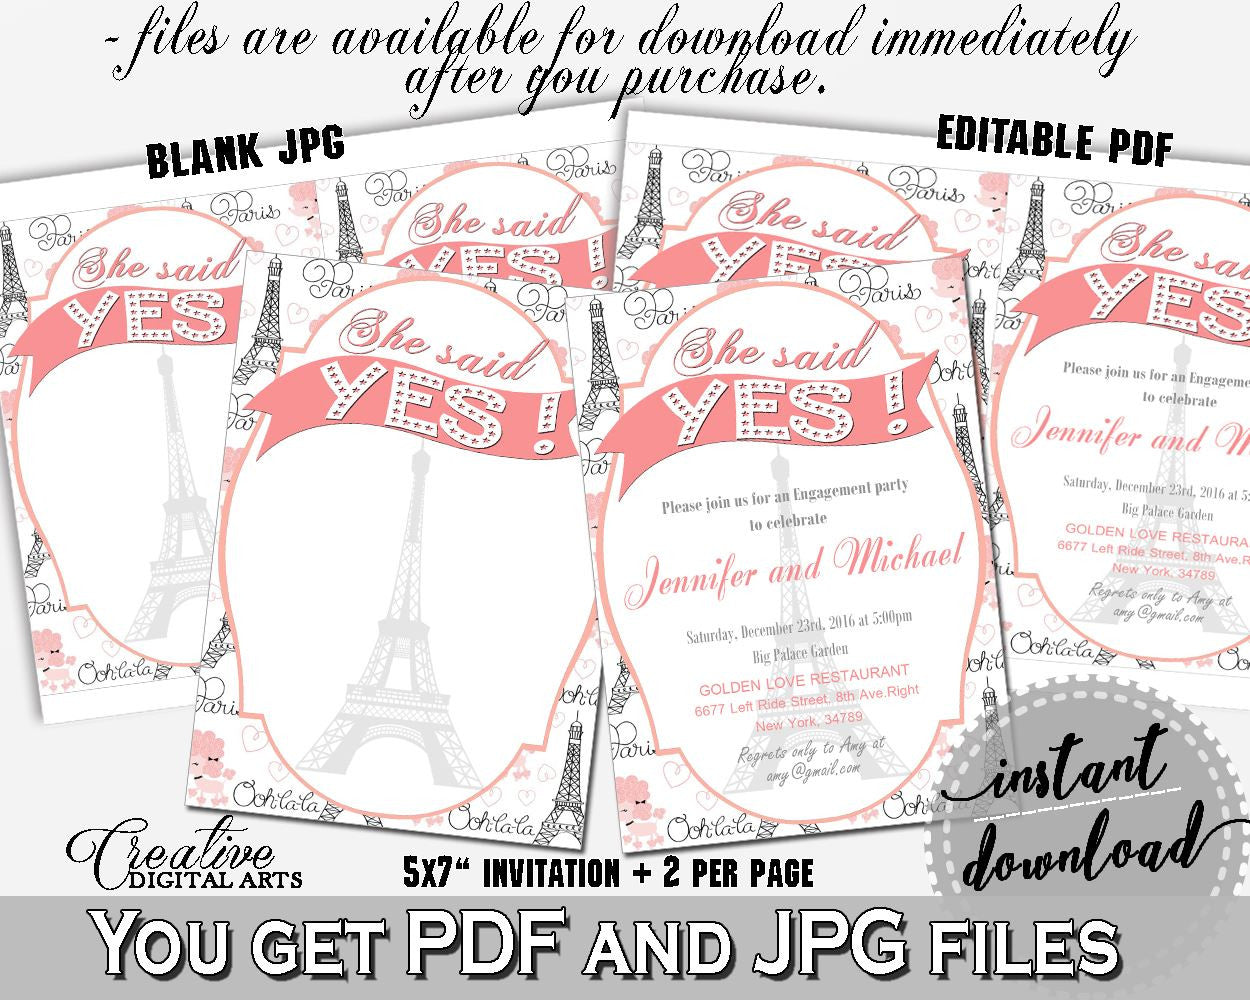 Paris Bridal Shower She Said Yes Invitation Editable in Pink And Gray, shower invite, eiffel tower, party ideas, bridal shower idea - NJAL9 - Digital Product